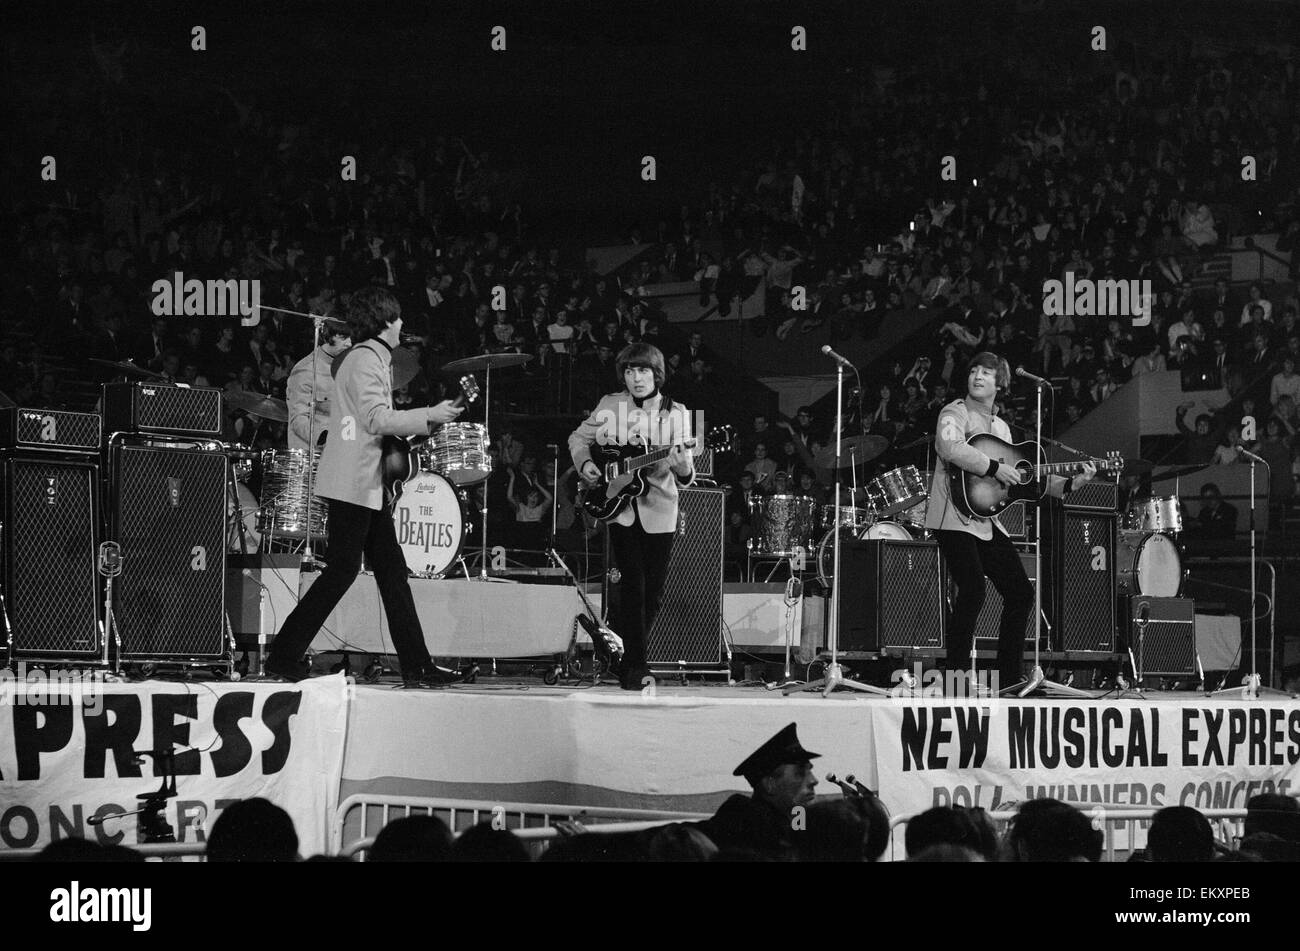 New Musical Express pop concert at Empire Pool Wembley 11th April 1965. The annual IPC New Musical Express concert featured poll winners & guest artists including: The Beatles. Left to right performing on stage: Ringo Starr, Paul McCartney, George Harriso Stock Photo